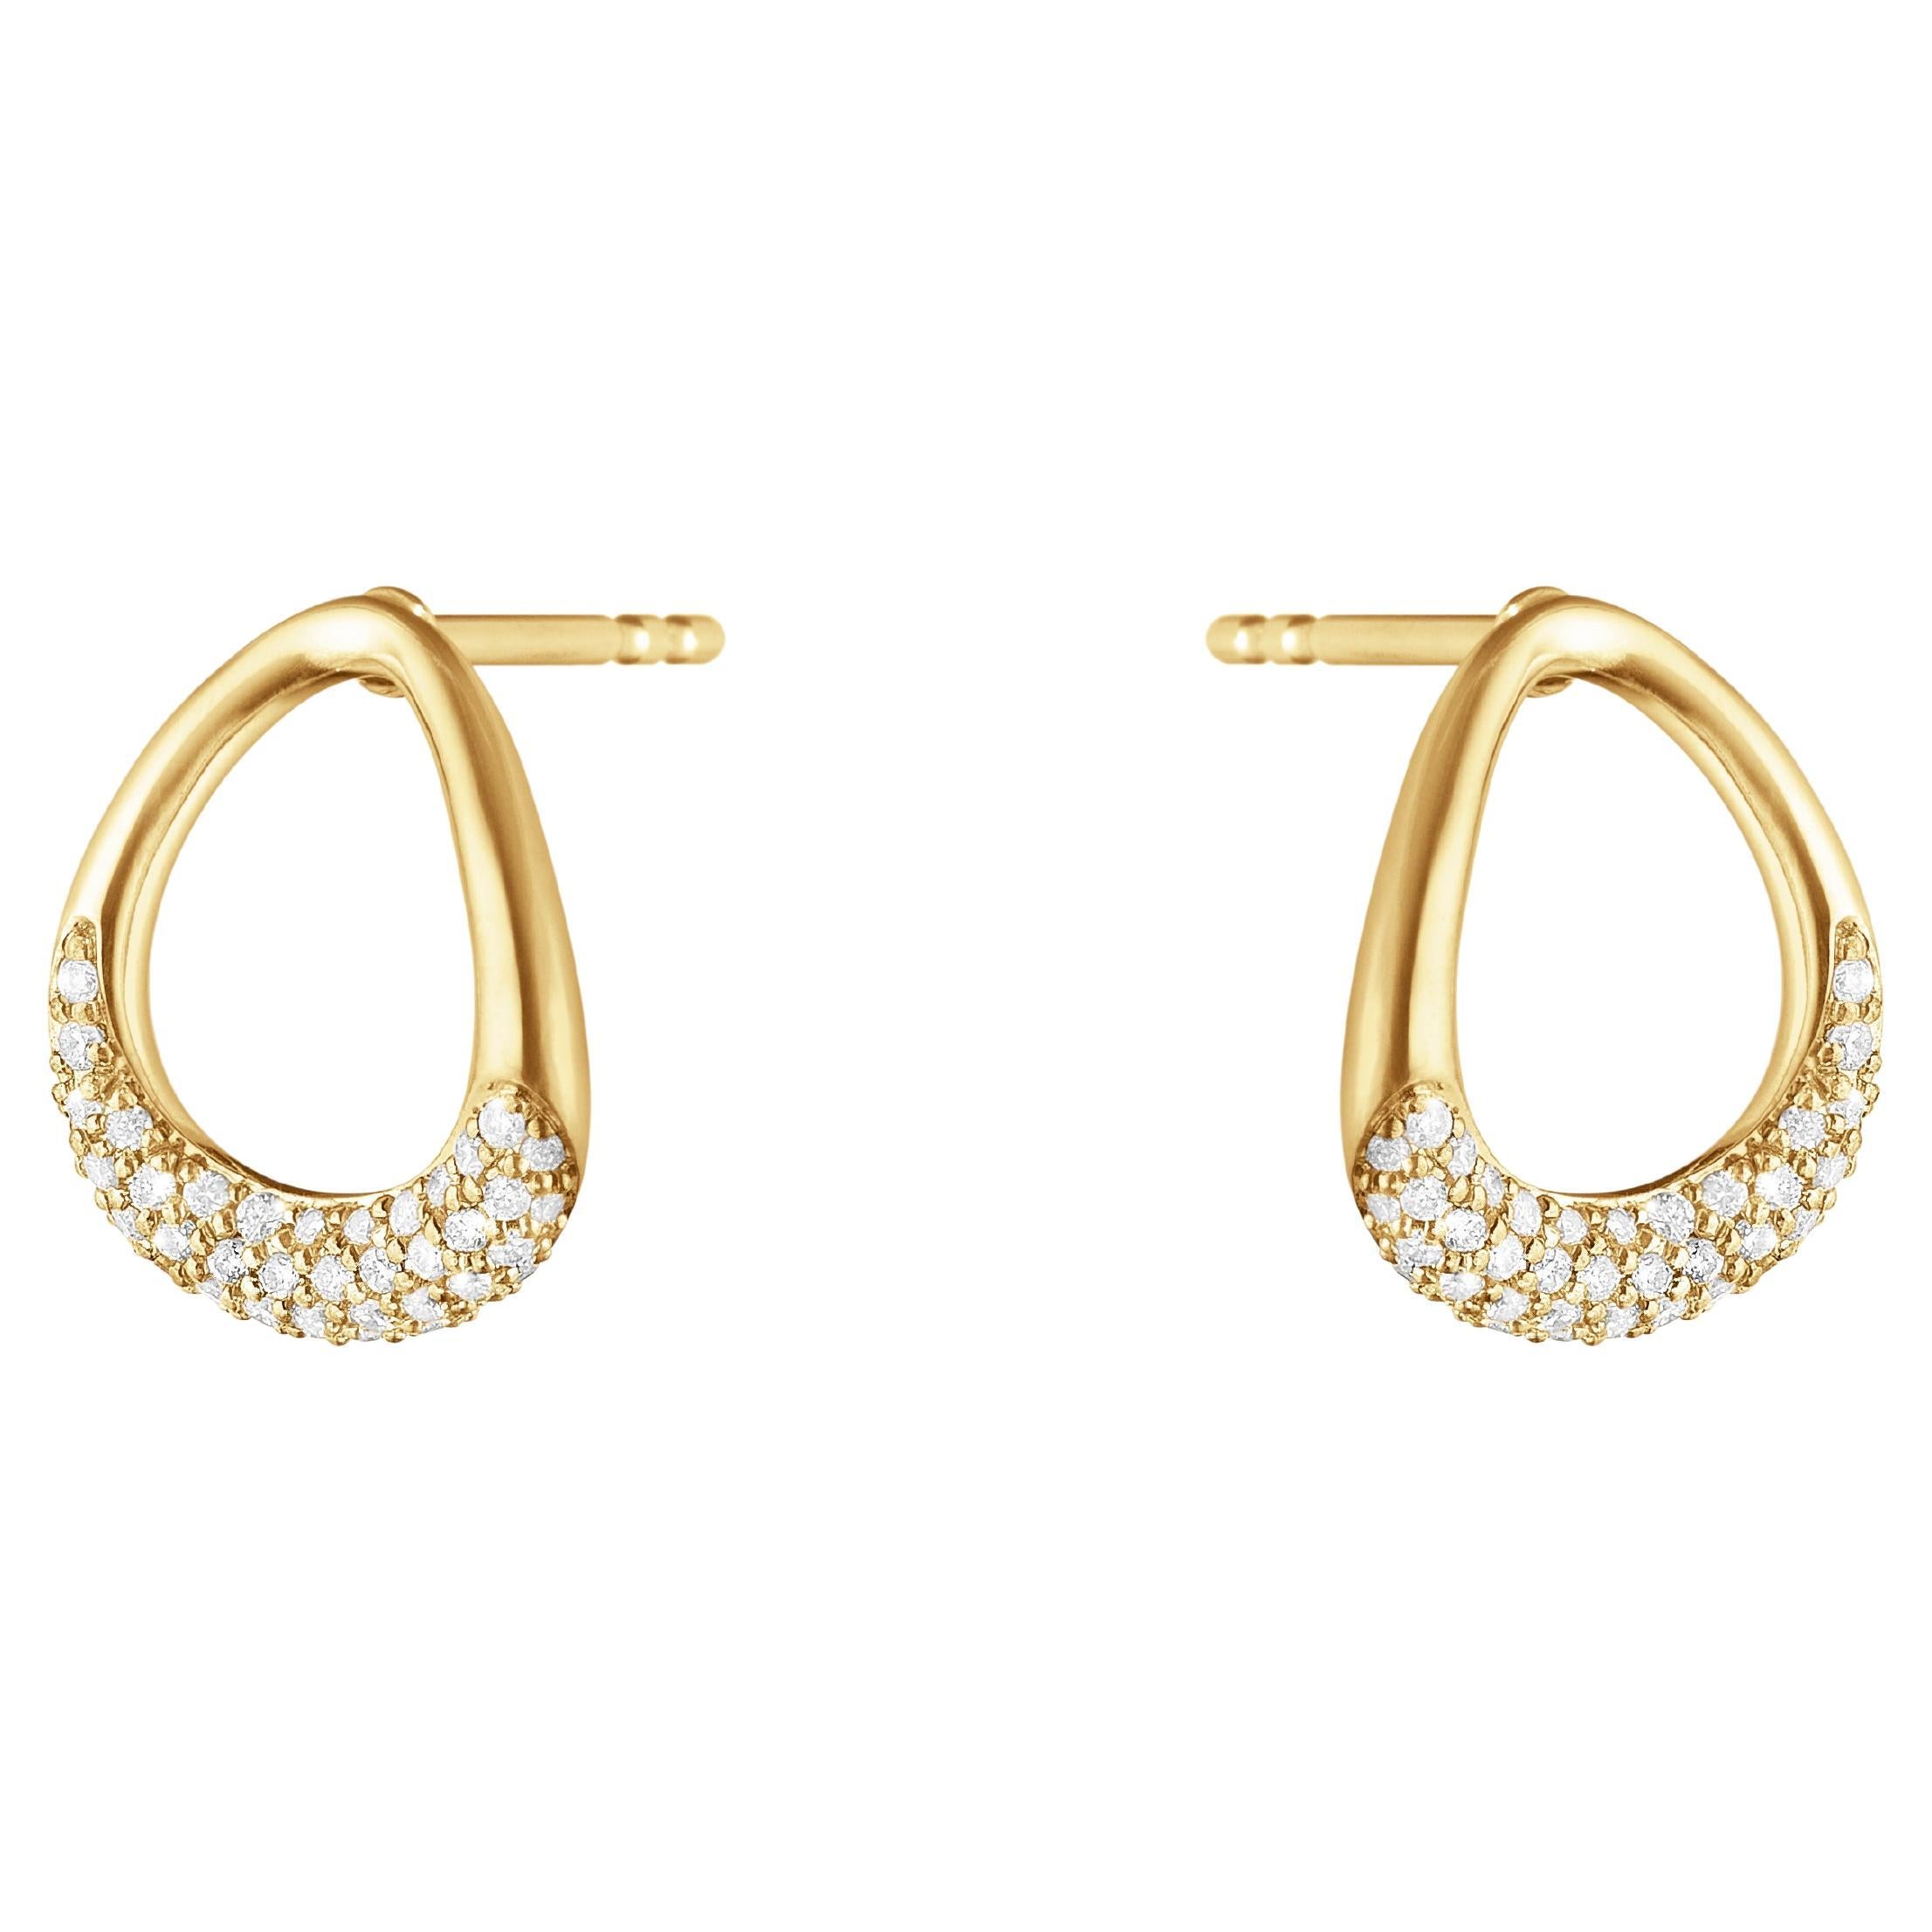 Offspring Earstud 1433D Yellow Gold Diamond Pave 0.19